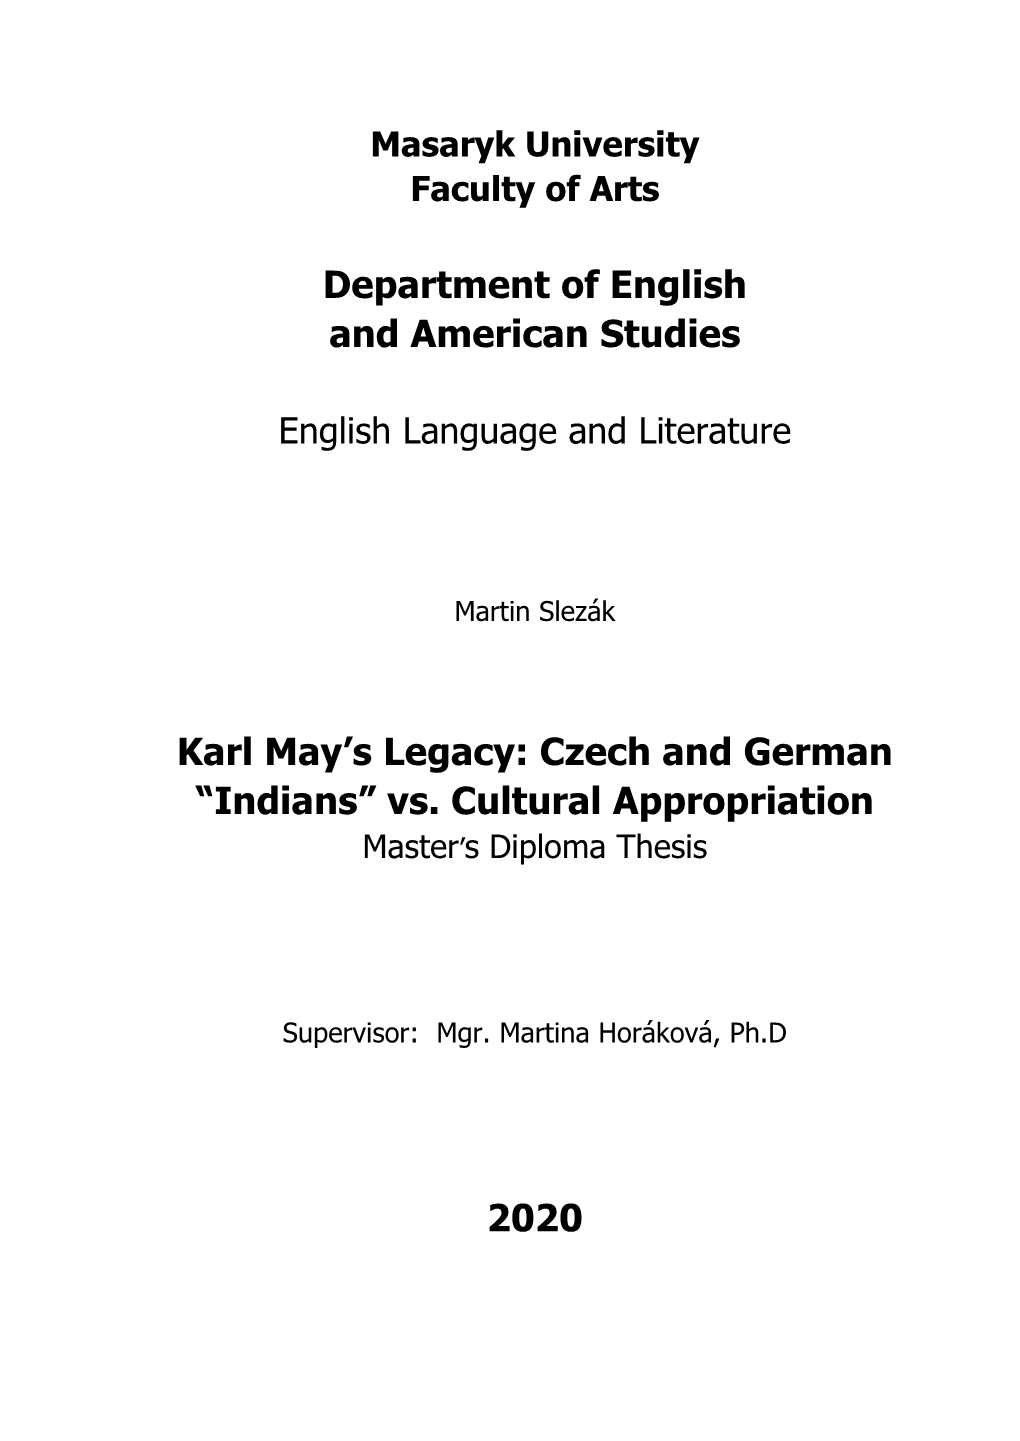 Czech and German “Indians” Vs. Cultural Appropriation 2020